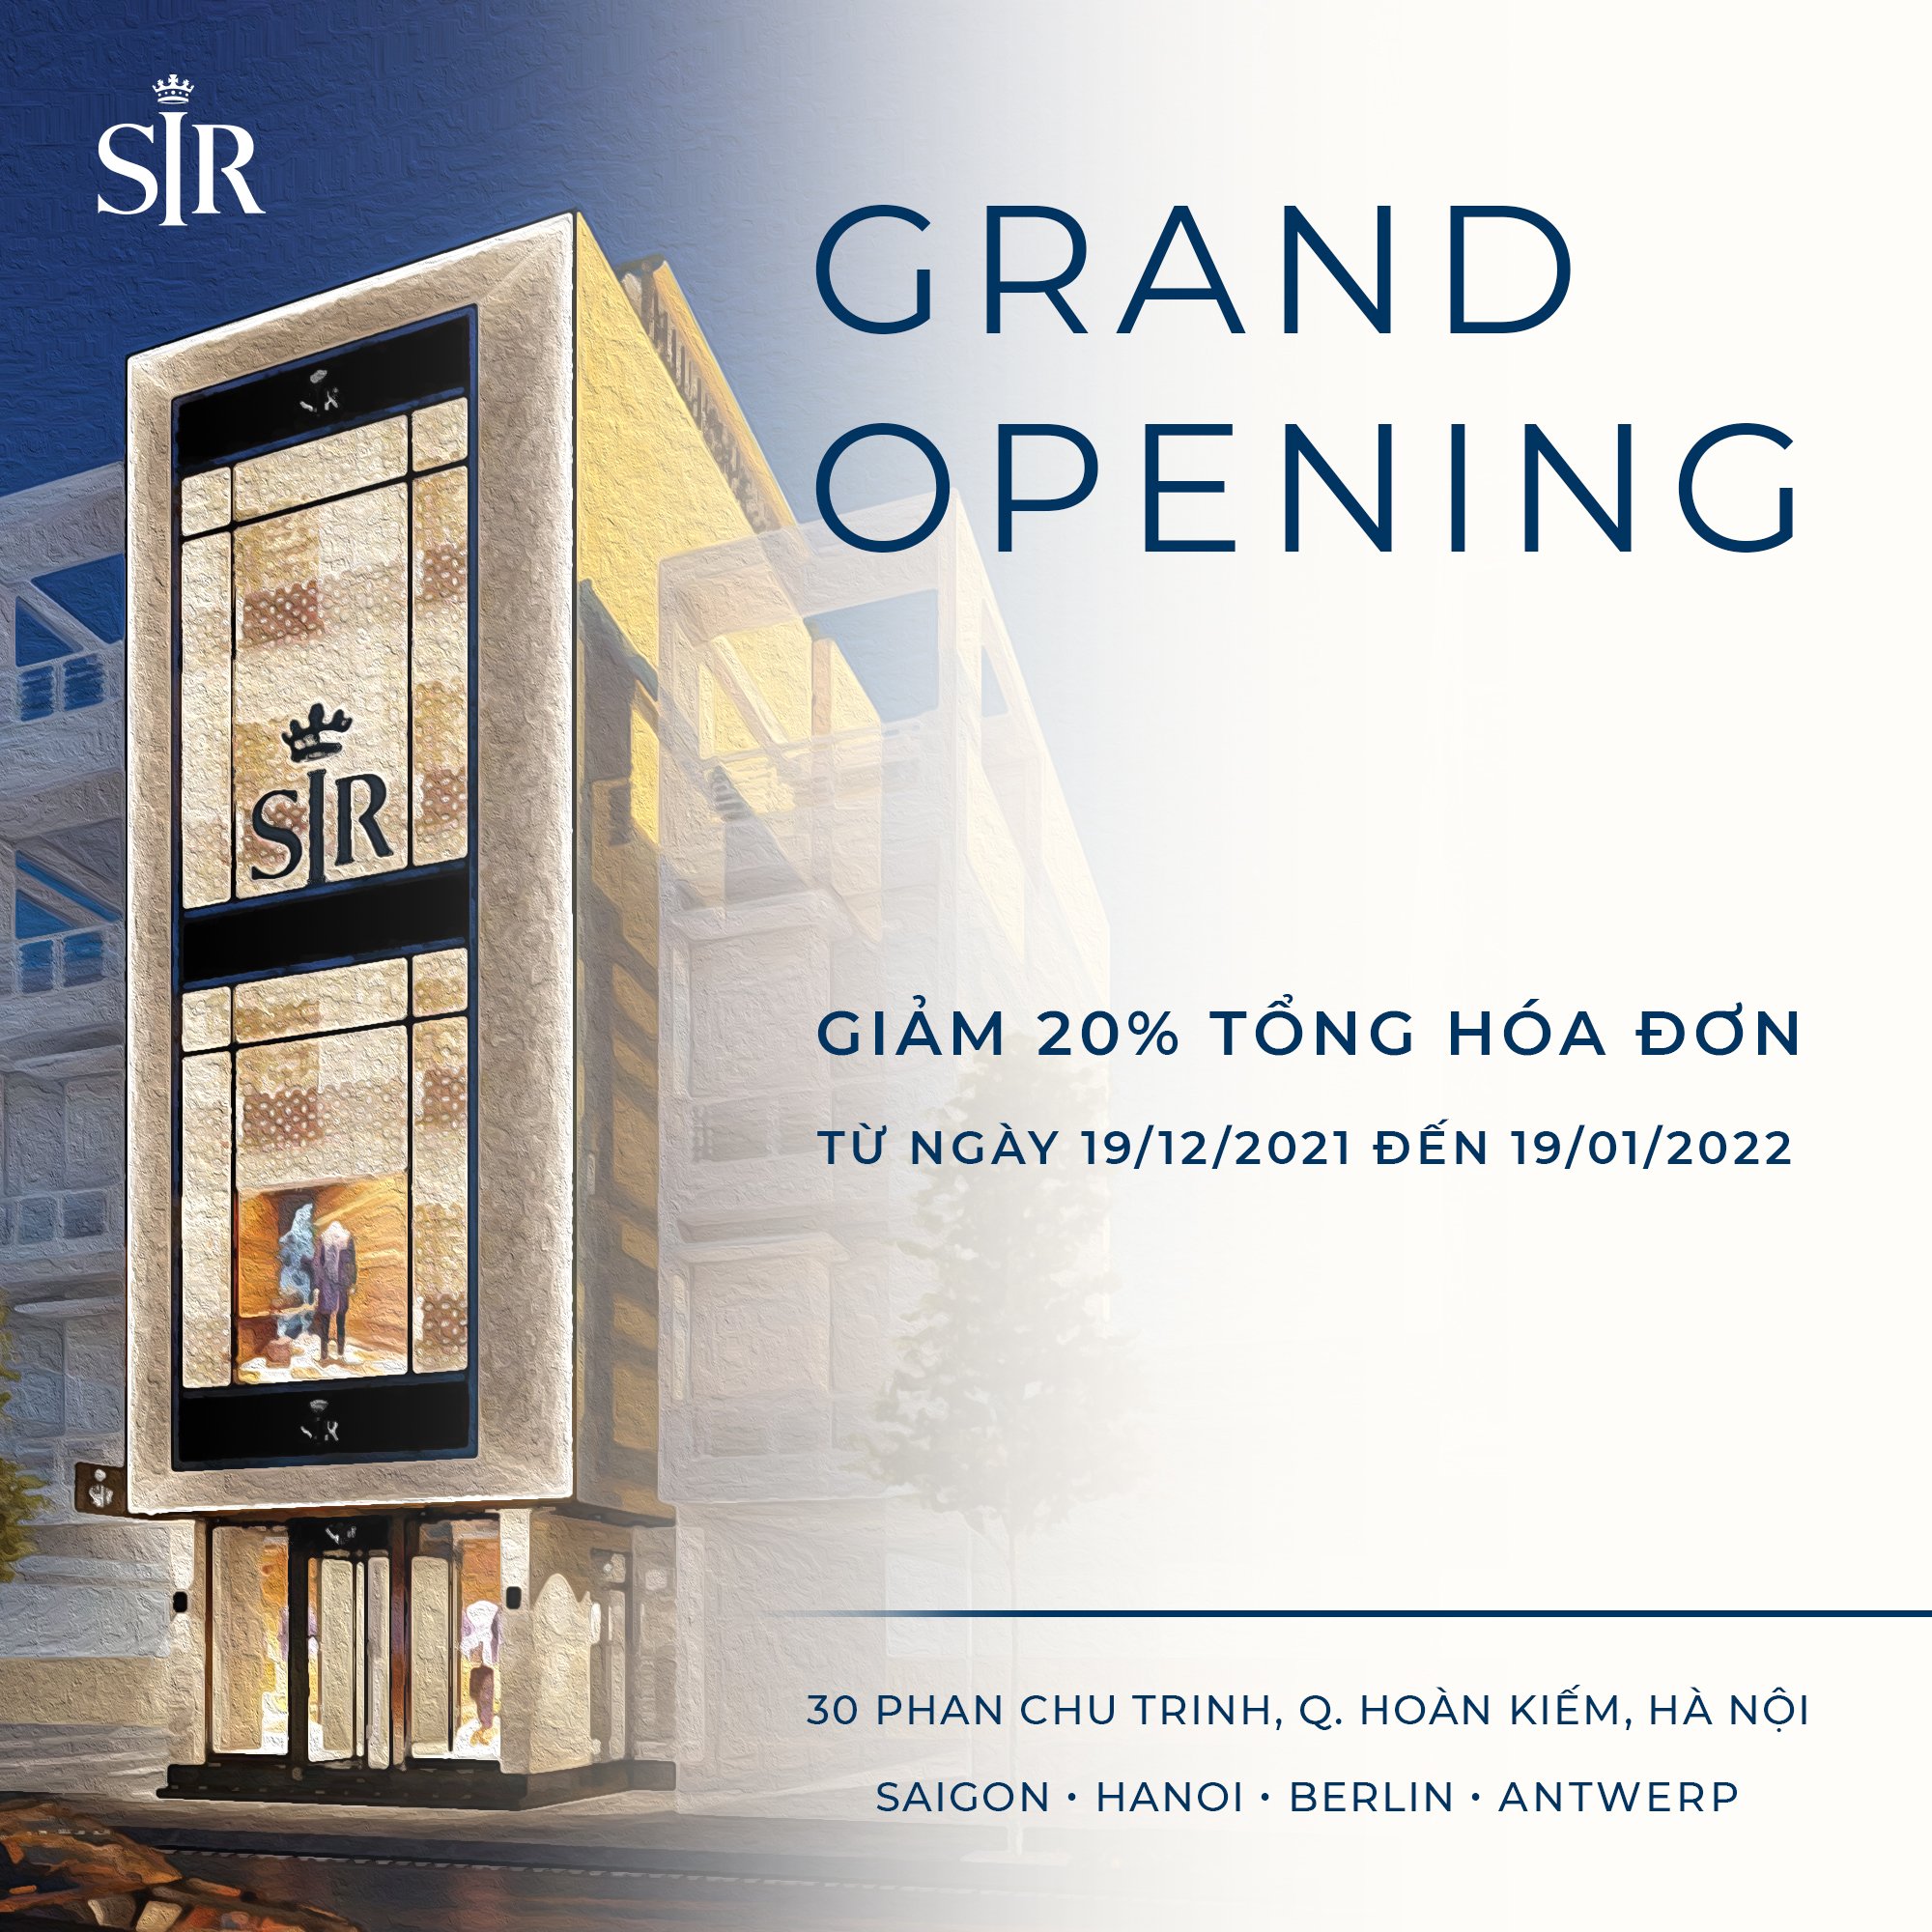 HANOI GRAND OPENING - DISCOUNT 20% FOR EVERY ORDER FROM 19/12/2021 TO 19/01/2022